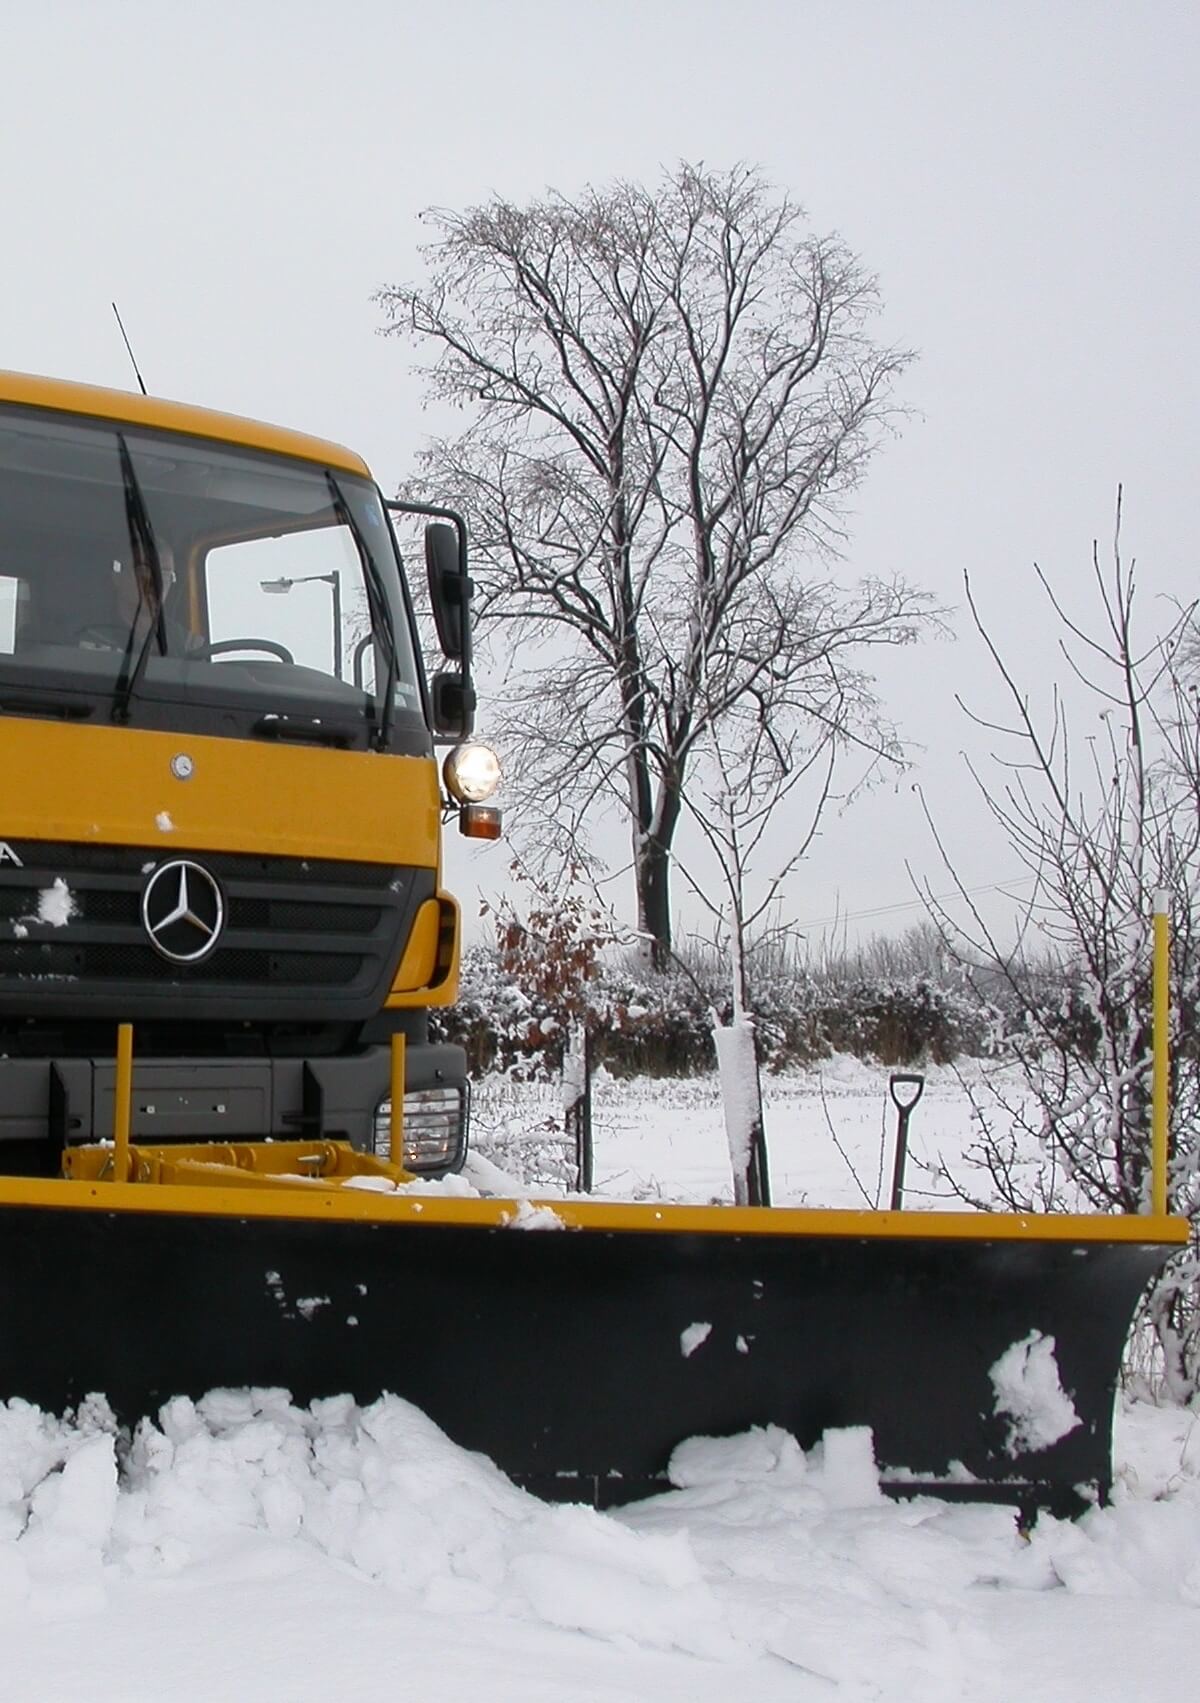 Winter Service Operations Vehicle in the snow